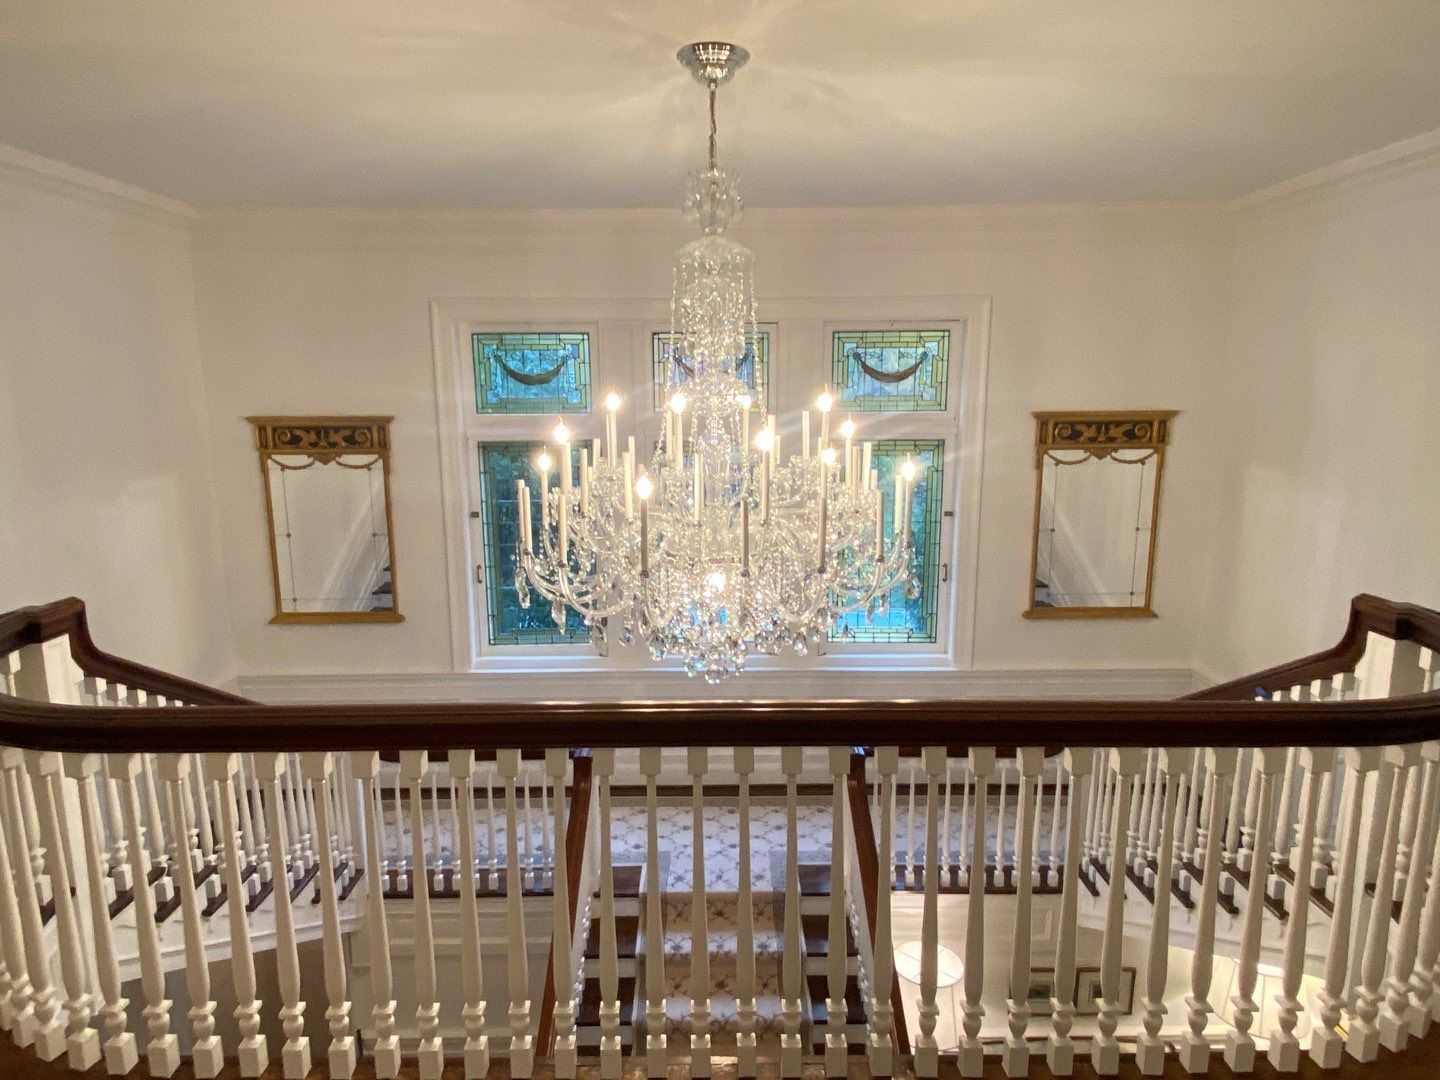 chandelier-and-lighting-installation-project-in-kansas-city-mo v17